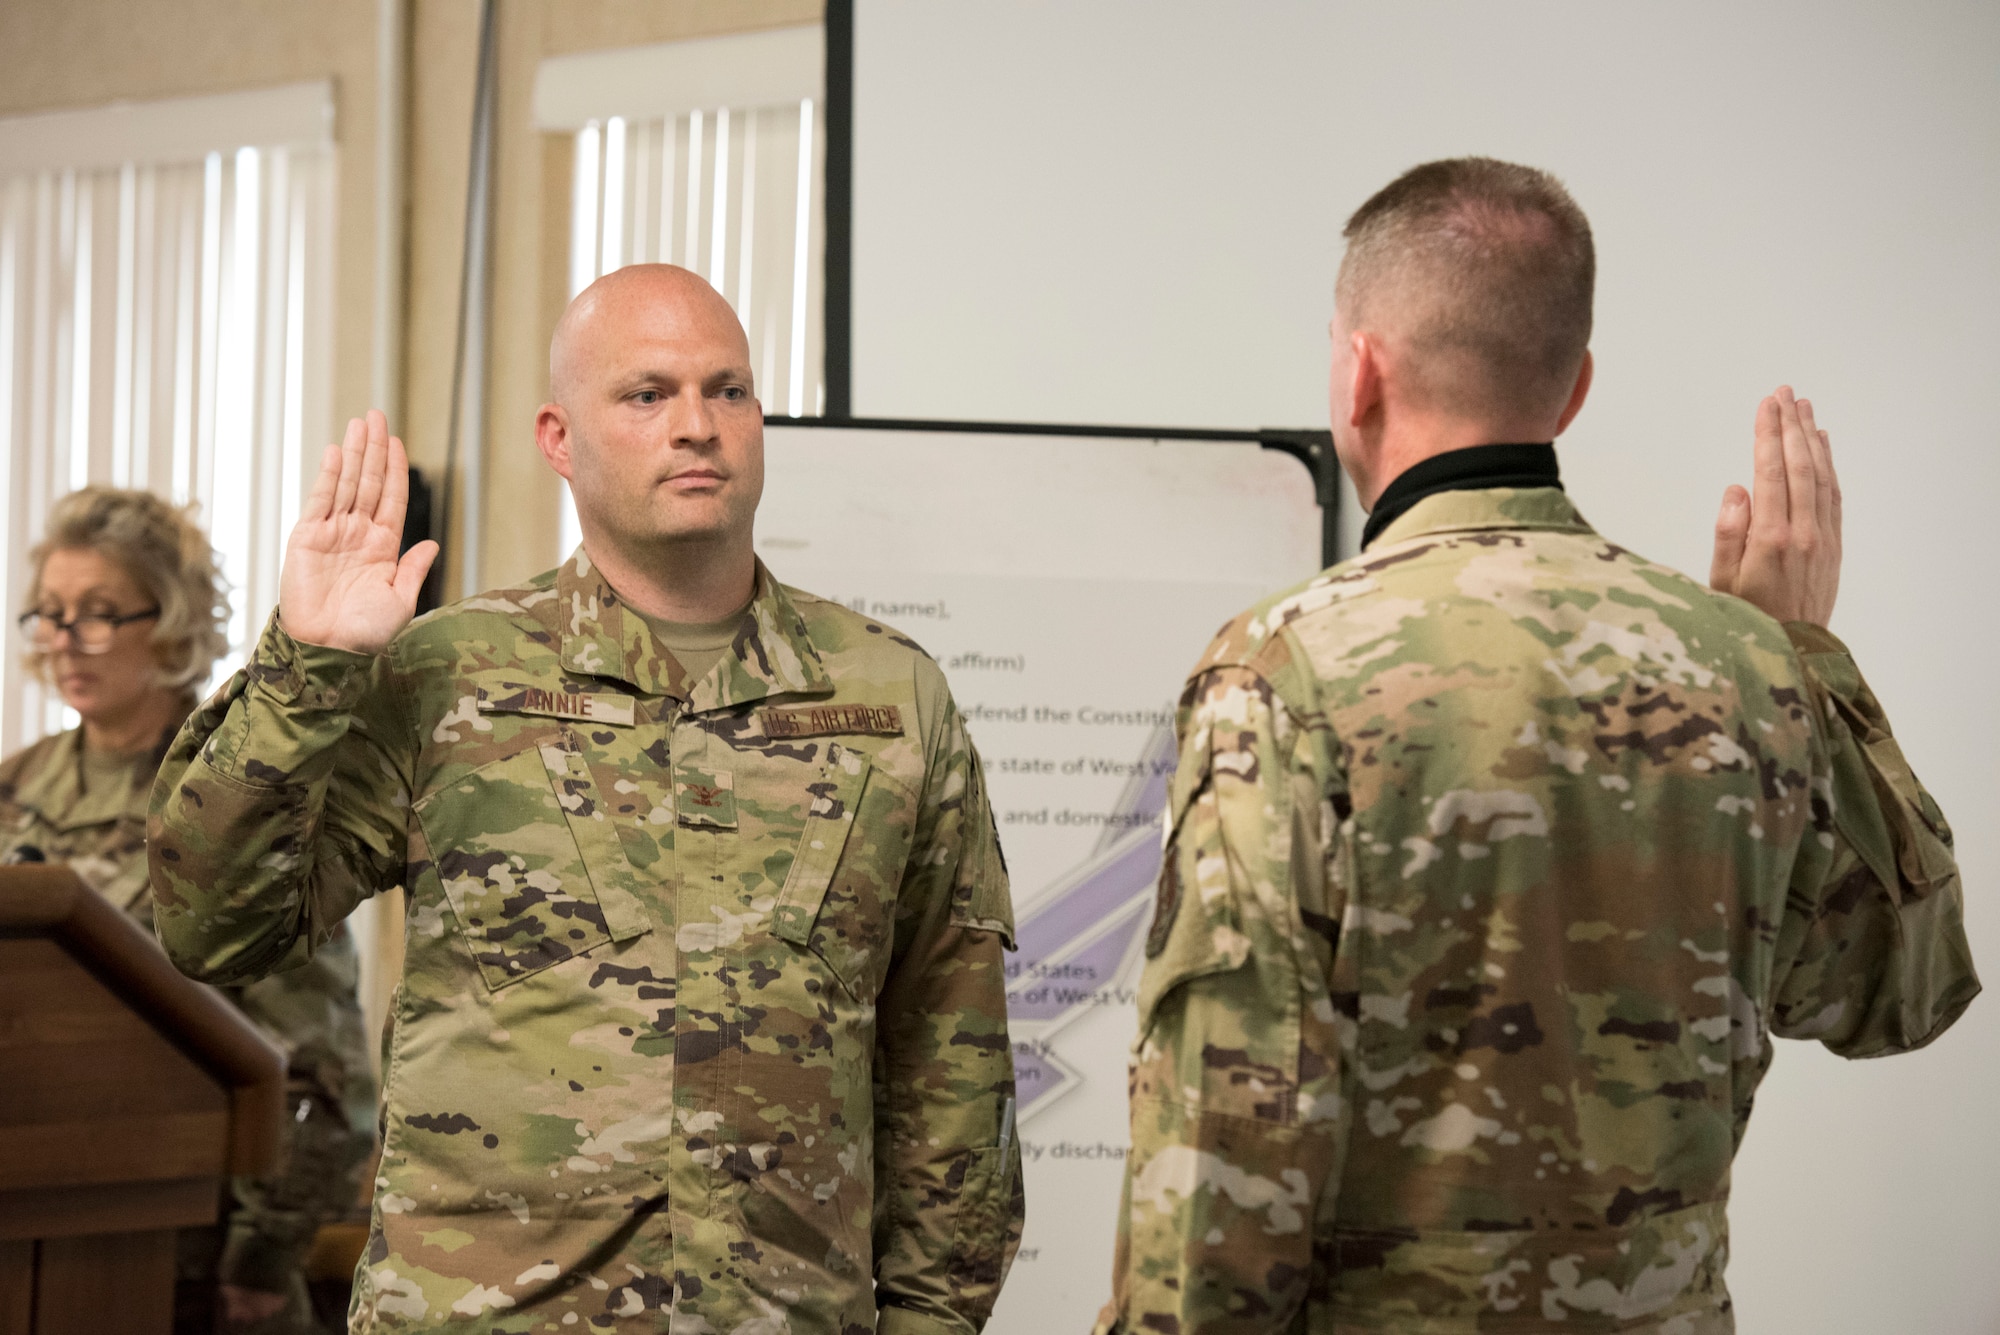 Col. Bill Annie takes the oath of office upon his promotion to colonel during a ceremony held in the 167th Airlift Wing's dining facility, June 13, 2020. Annie also assumed command of the 167th Missin Support group during the ceremony.